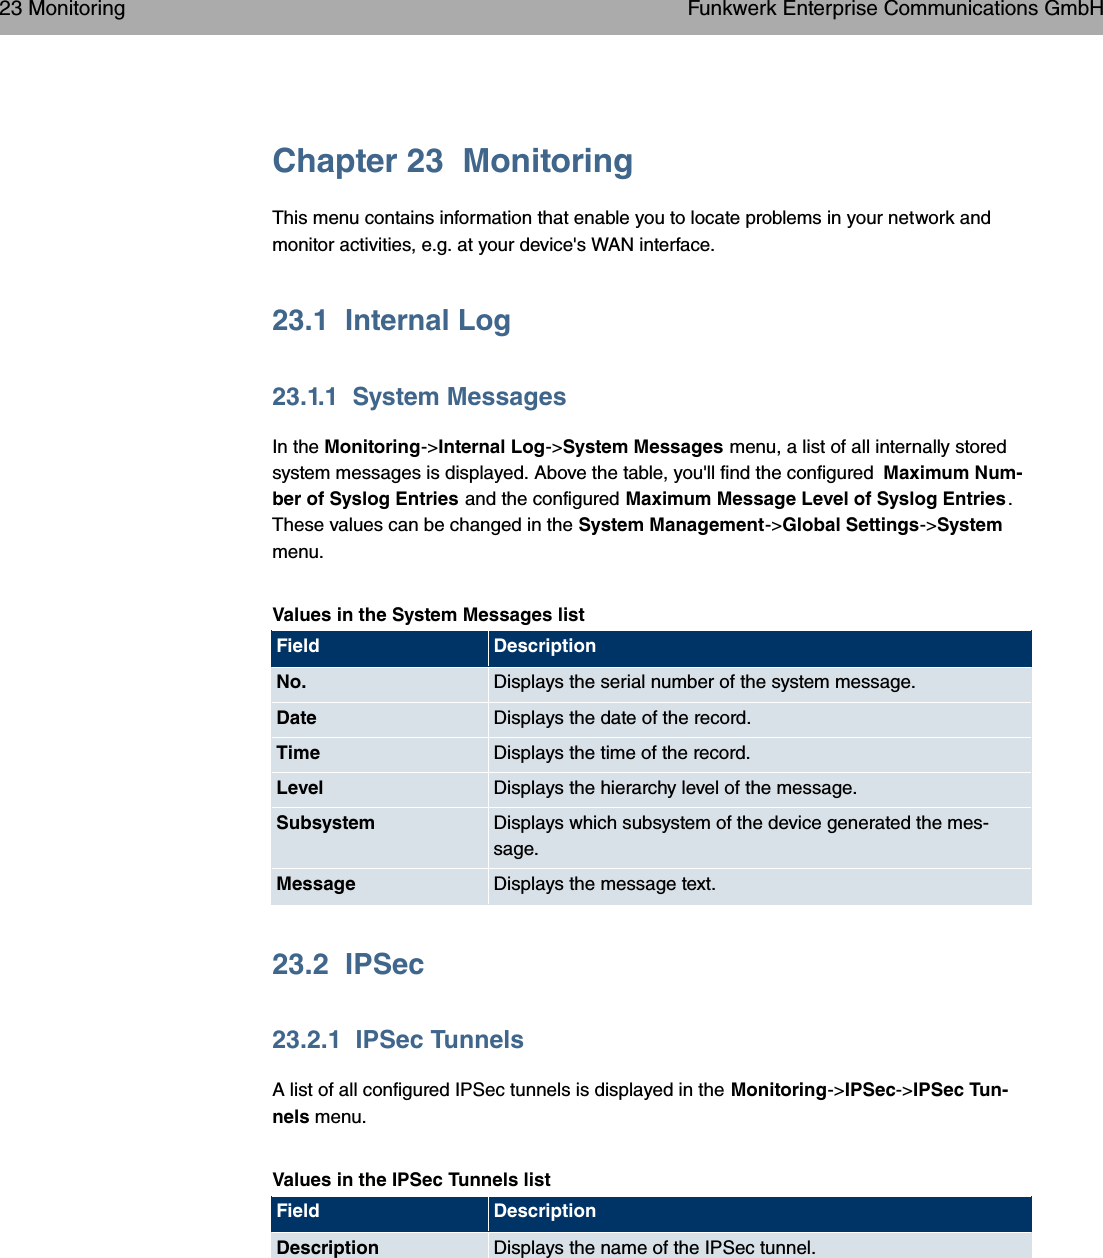 Chapter 23 MonitoringThis menu contains information that enable you to locate problems in your network andmonitor activities, e.g. at your device&apos;s WAN interface.23.1 Internal Log23.1.1 System MessagesIn the Monitoring-&gt;Internal Log-&gt;System Messages menu, a list of all internally storedsystem messages is displayed. Above the table, you&apos;ll find the configured Maximum Num-ber of Syslog Entries and the configured Maximum Message Level of Syslog Entries.These values can be changed in the System Management-&gt;Global Settings-&gt;Systemmenu.Values in the System Messages listField DescriptionNo. Displays the serial number of the system message.Date Displays the date of the record.Time Displays the time of the record.Level Displays the hierarchy level of the message.Subsystem Displays which subsystem of the device generated the mes-sage.Message Displays the message text.23.2 IPSec23.2.1 IPSec TunnelsA list of all configured IPSec tunnels is displayed in the Monitoring-&gt;IPSec-&gt;IPSec Tun-nels menu.Values in the IPSec Tunnels listField DescriptionDescription Displays the name of the IPSec tunnel.23 Monitoring Funkwerk Enterprise Communications GmbH332 bintec WLAN and Industrial WLAN